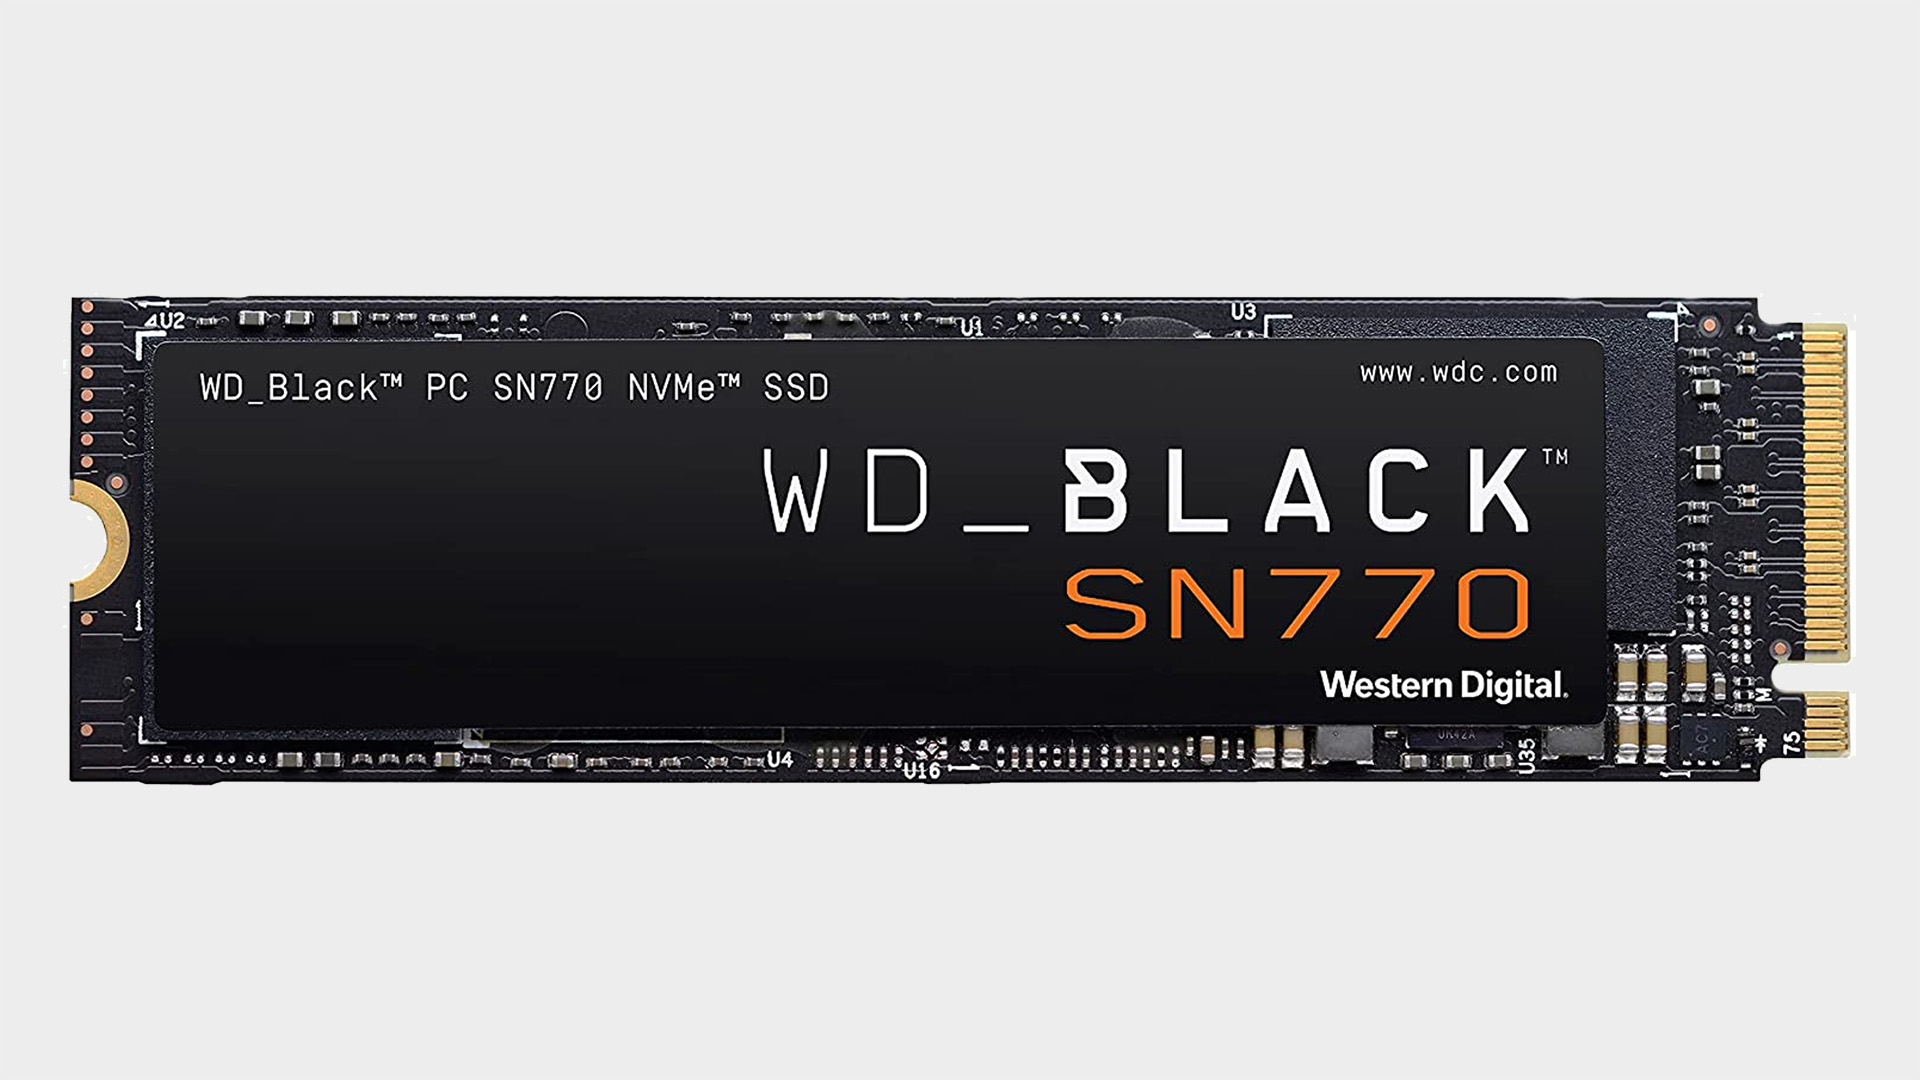 WD_Black SN770 500GB model pictured